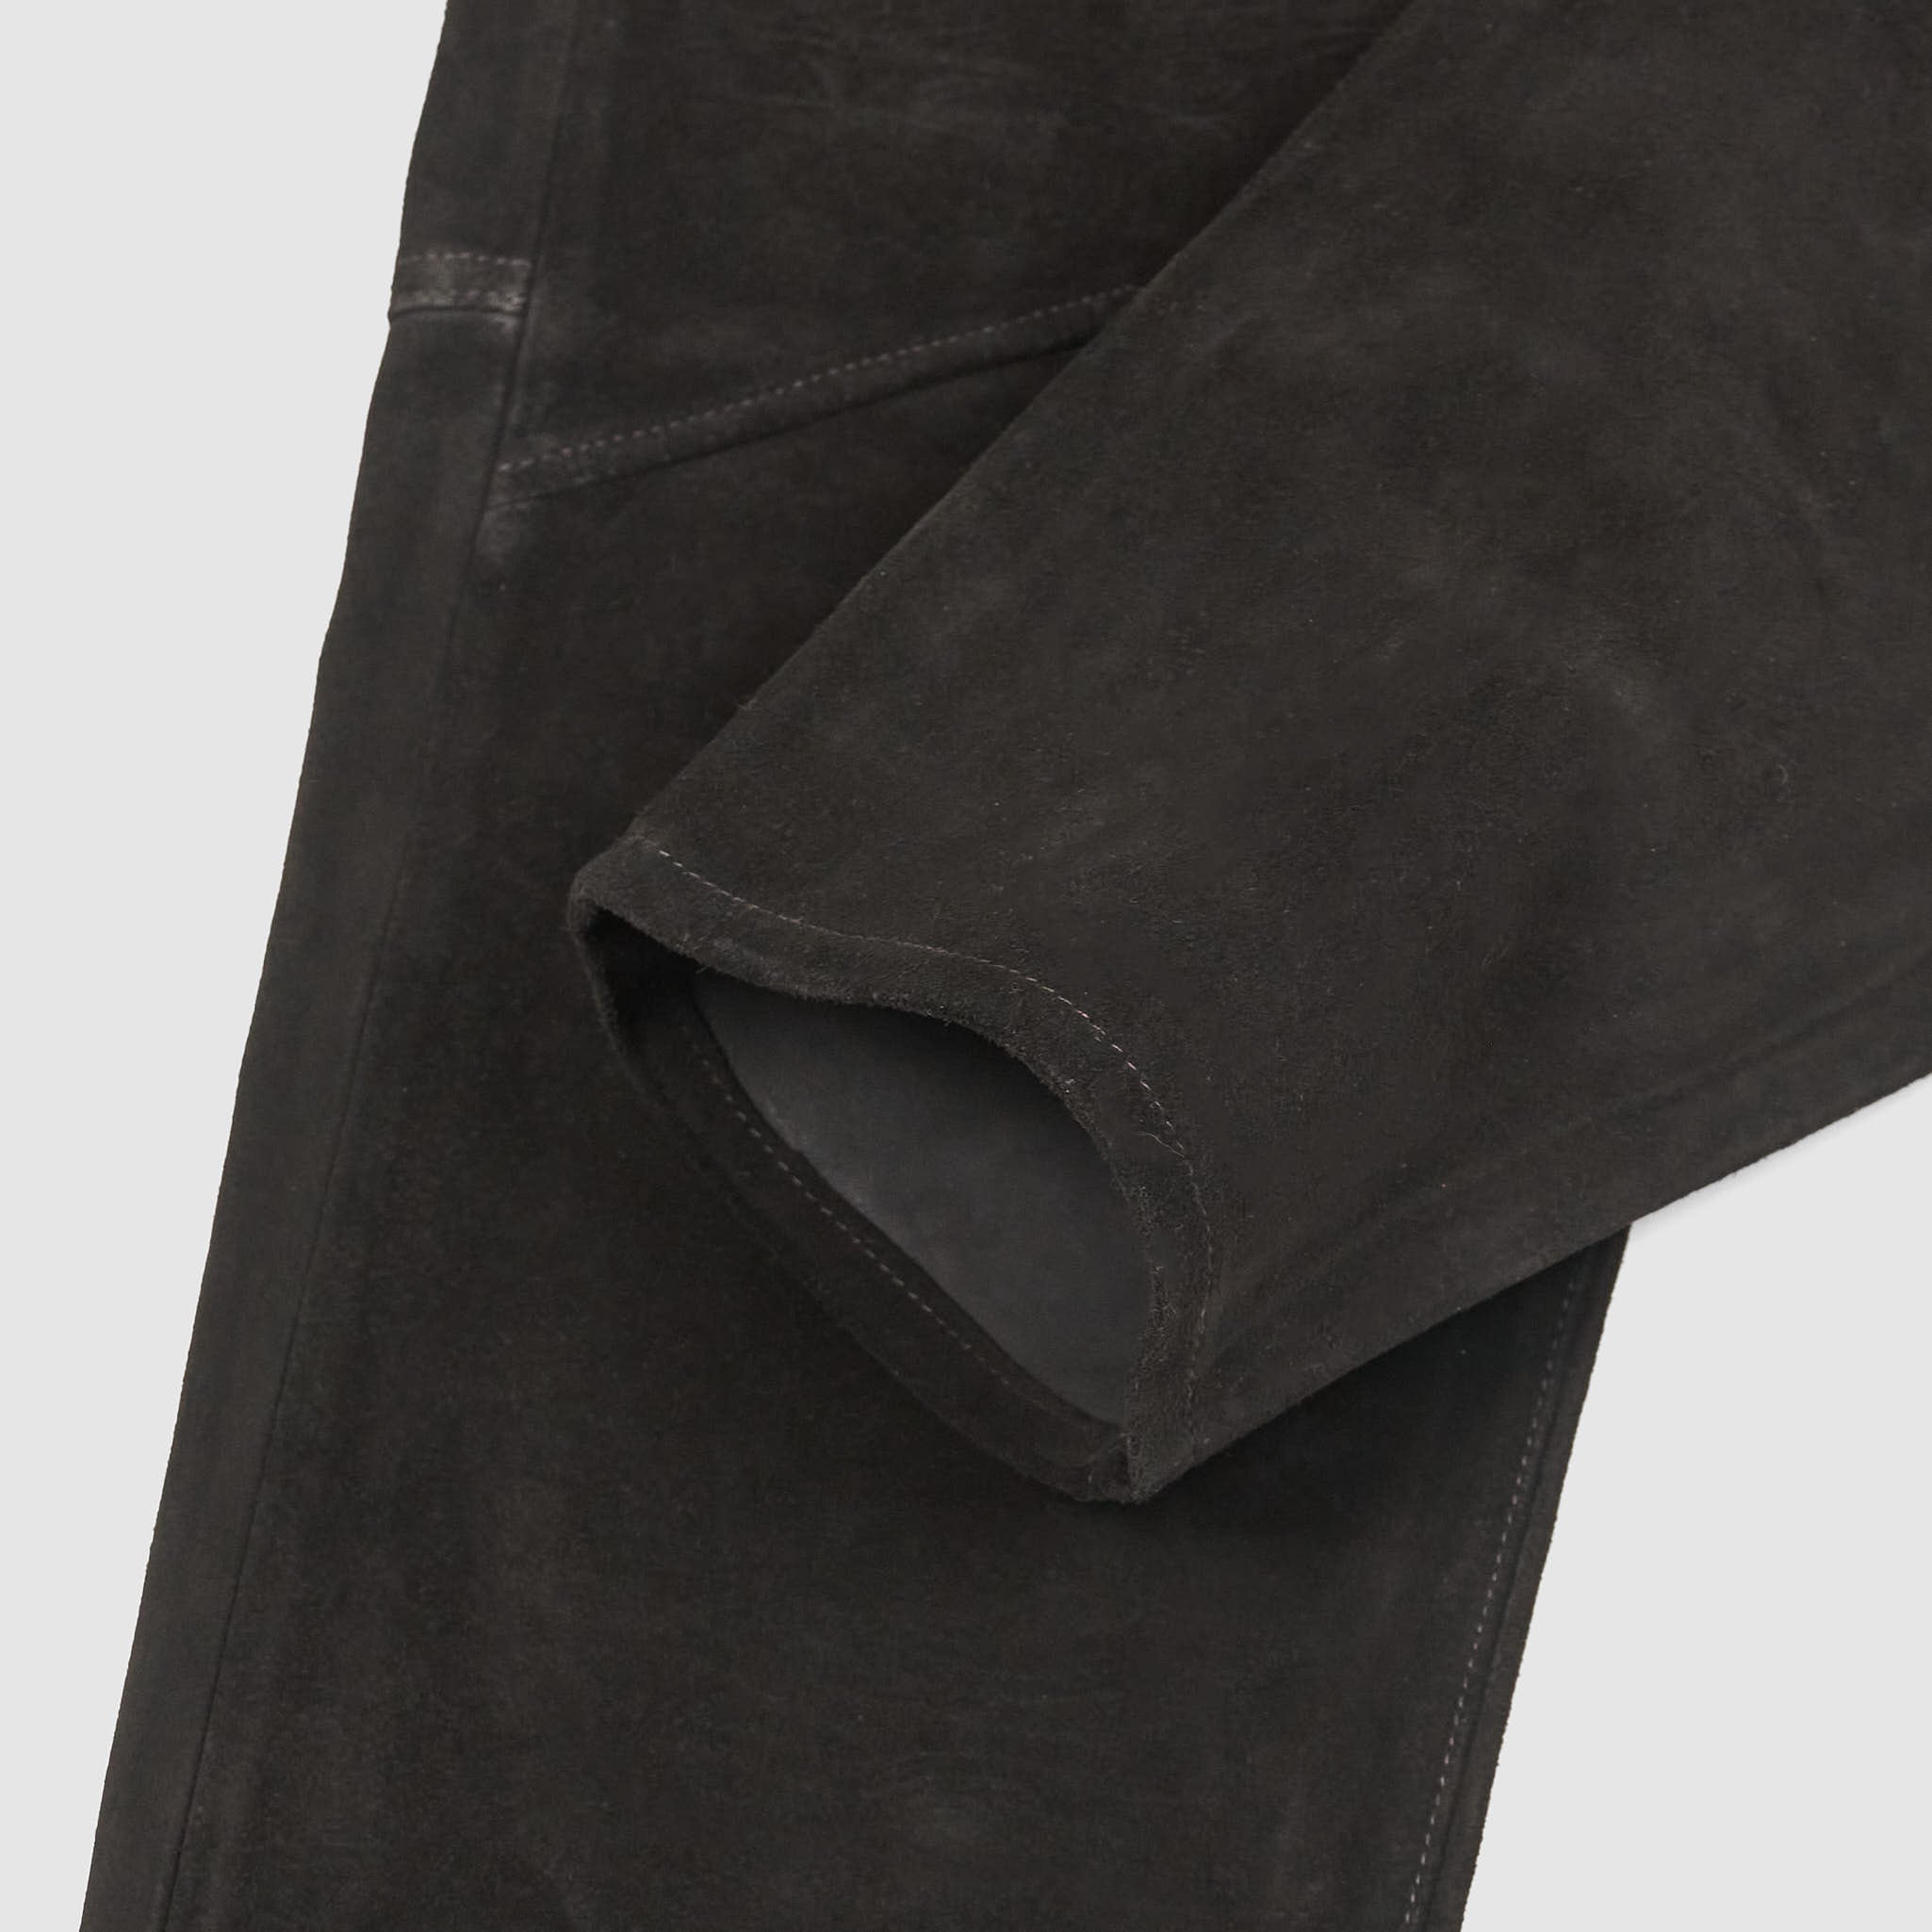 Vintage Y2k Leather Suede Pants from Laure Jeans Company by Ralph Laur –  Odd Faery